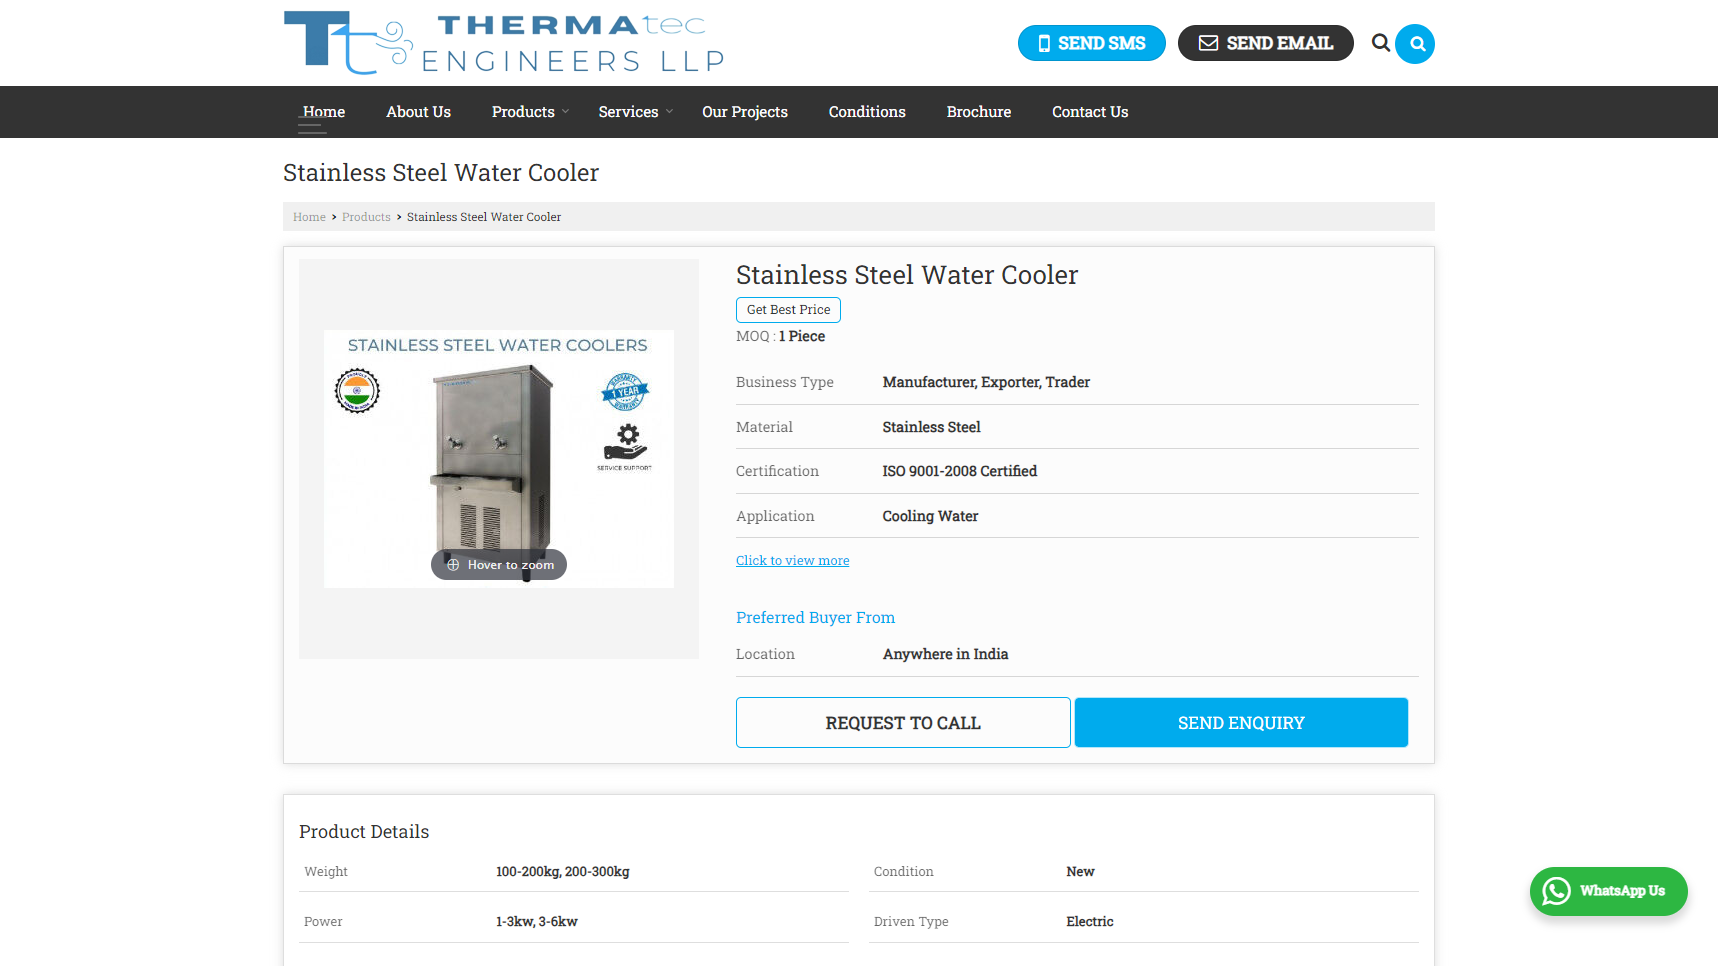 Thermatec Engineers - Water Cooler Manufacturer